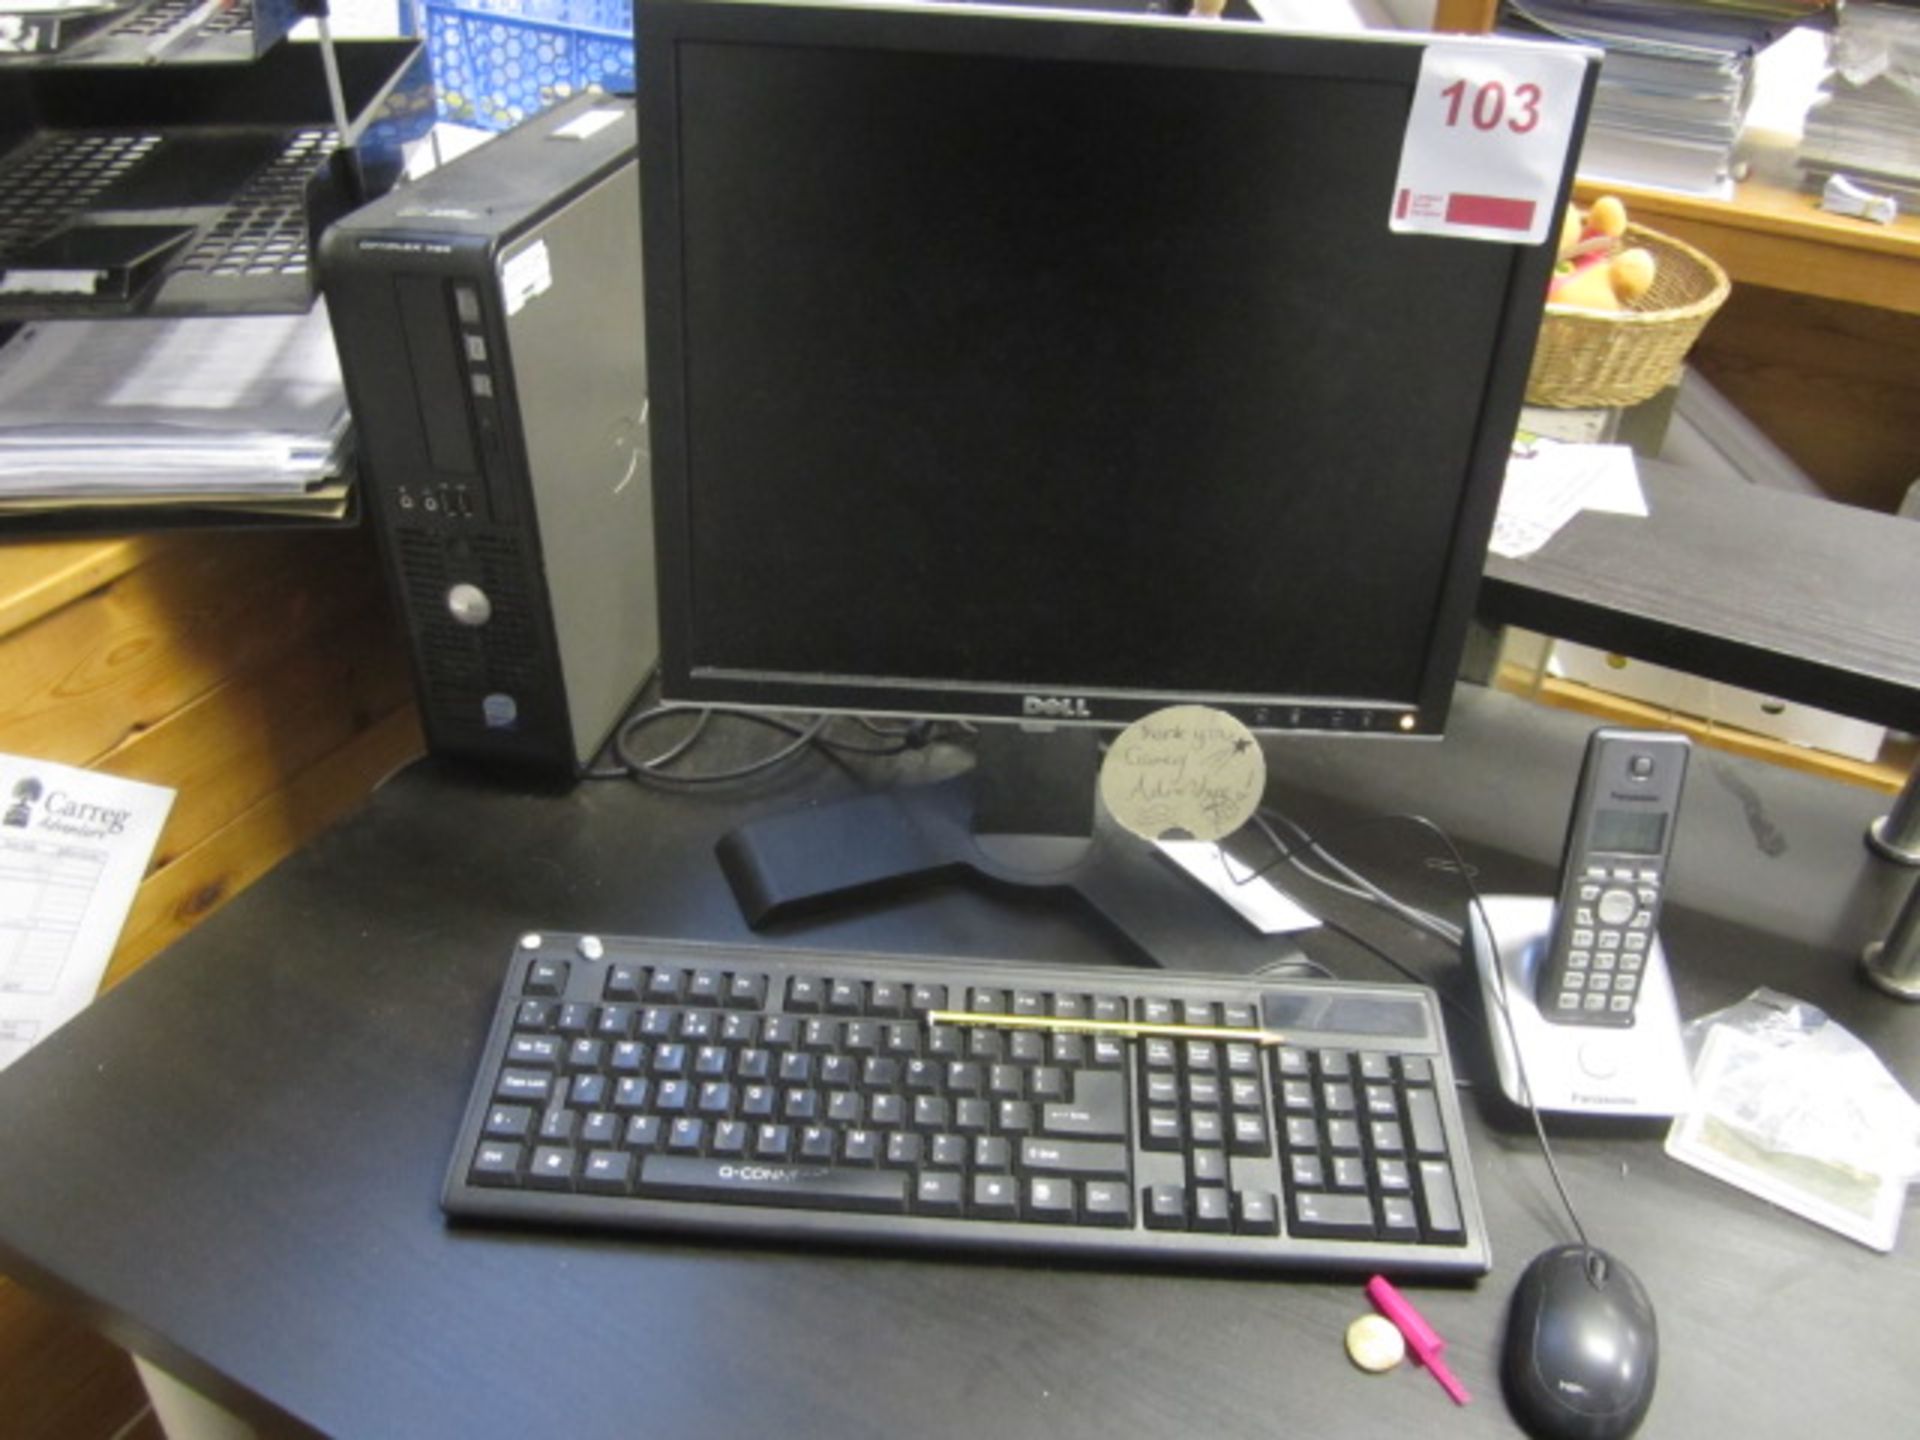 Dell Optiplex 760 computer system, Dell TFT, keyboard, mouse